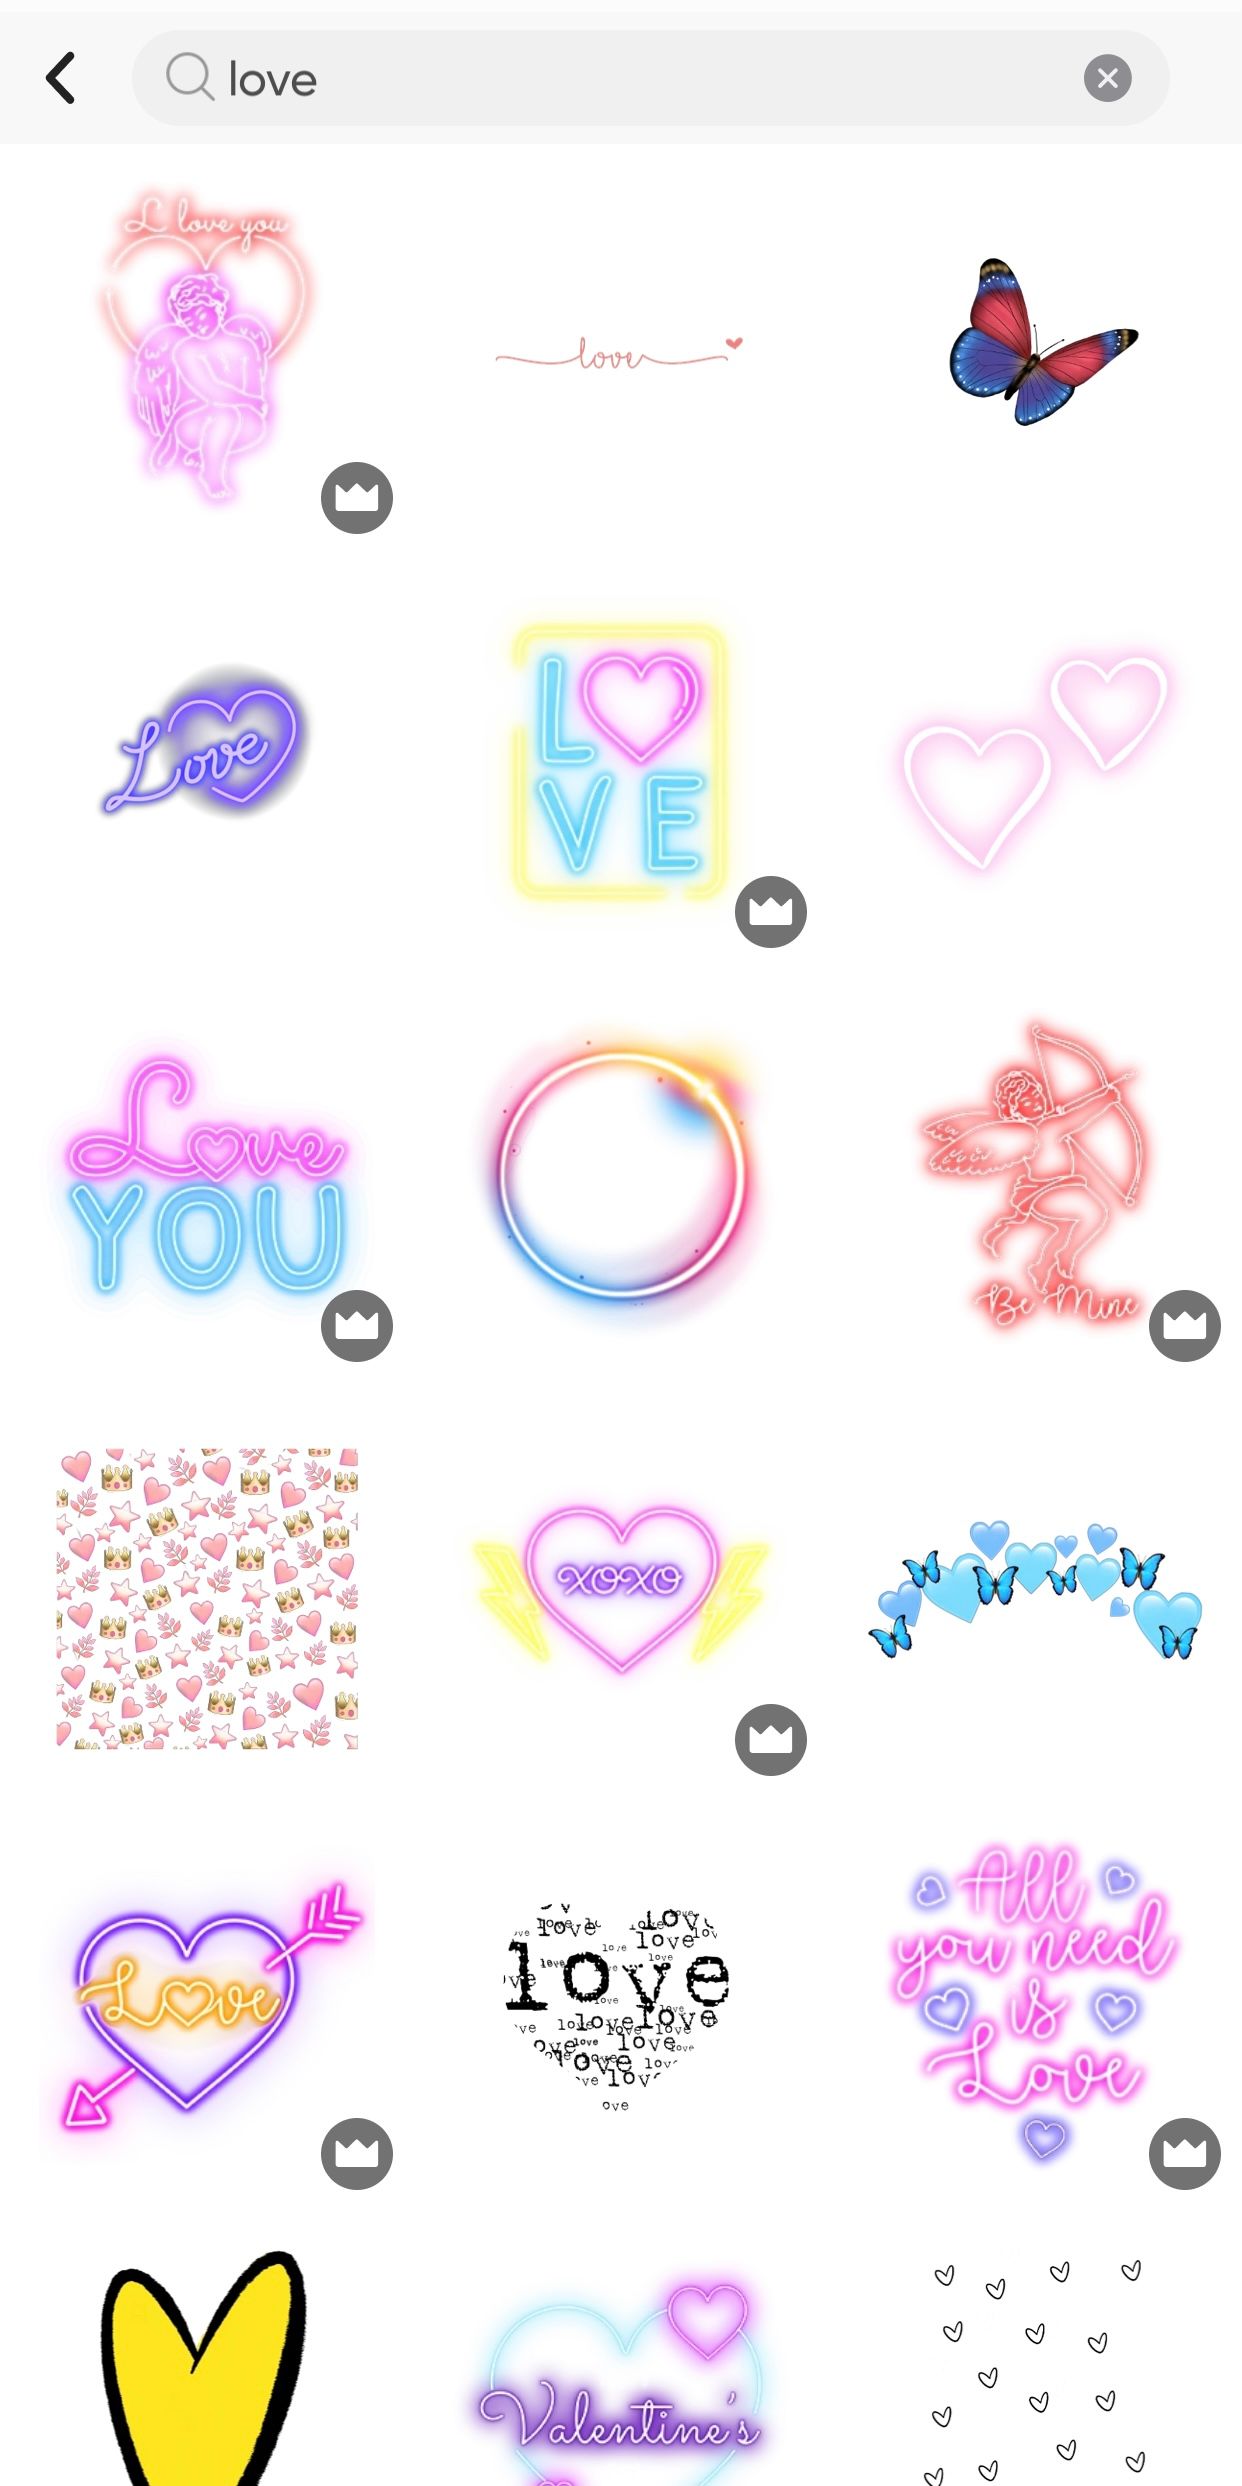 Variety of love themed stickers in Picsart